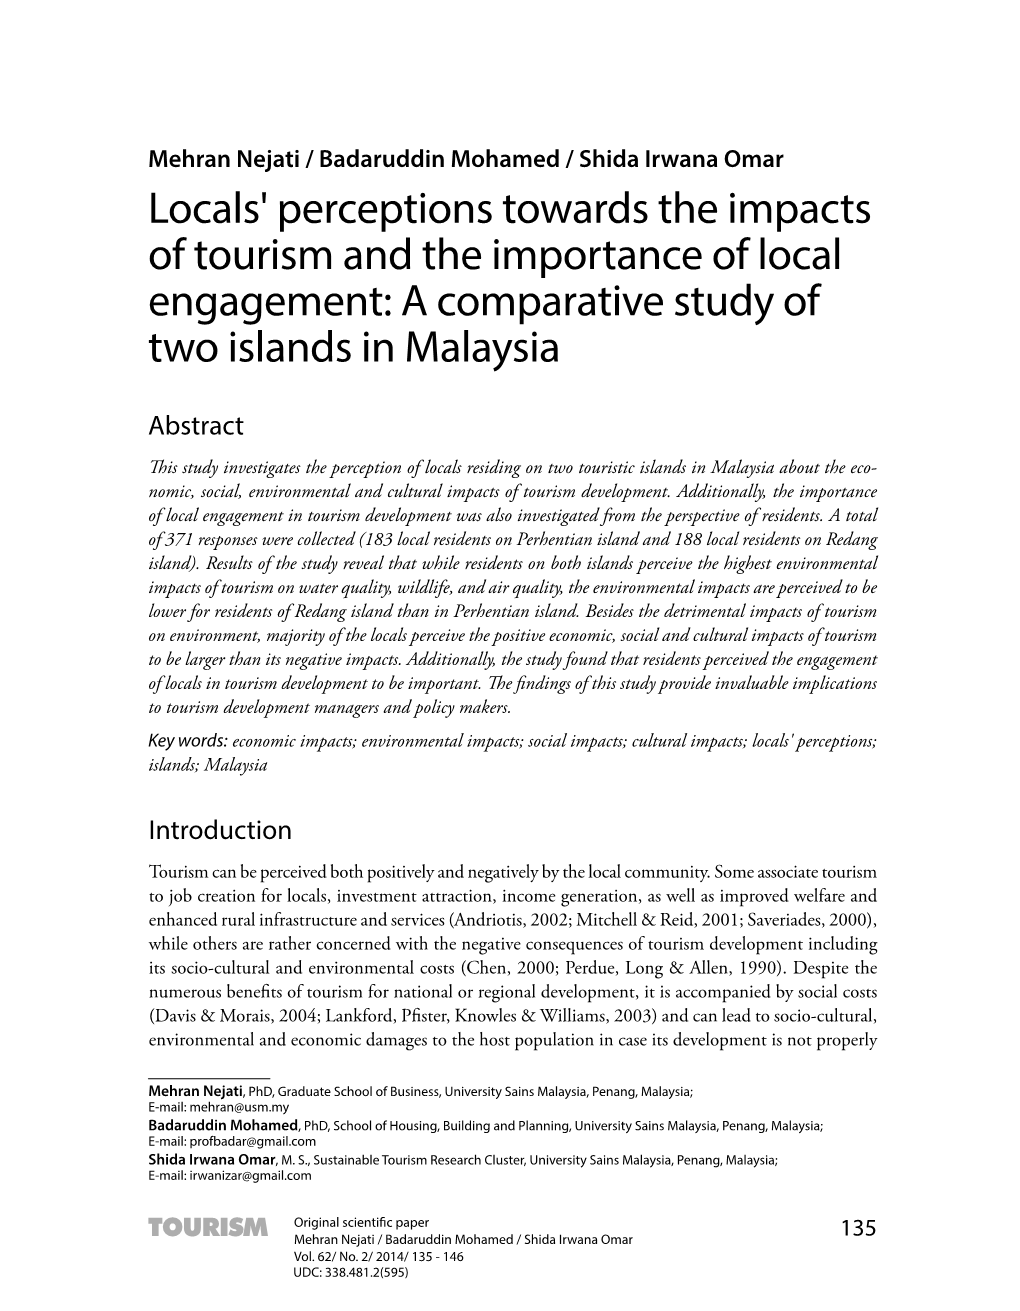 Locals' Perceptions Towards the Impacts of Tourism and the Importance of Local Engagement: a Comparative Study of Two Islands in Malaysia